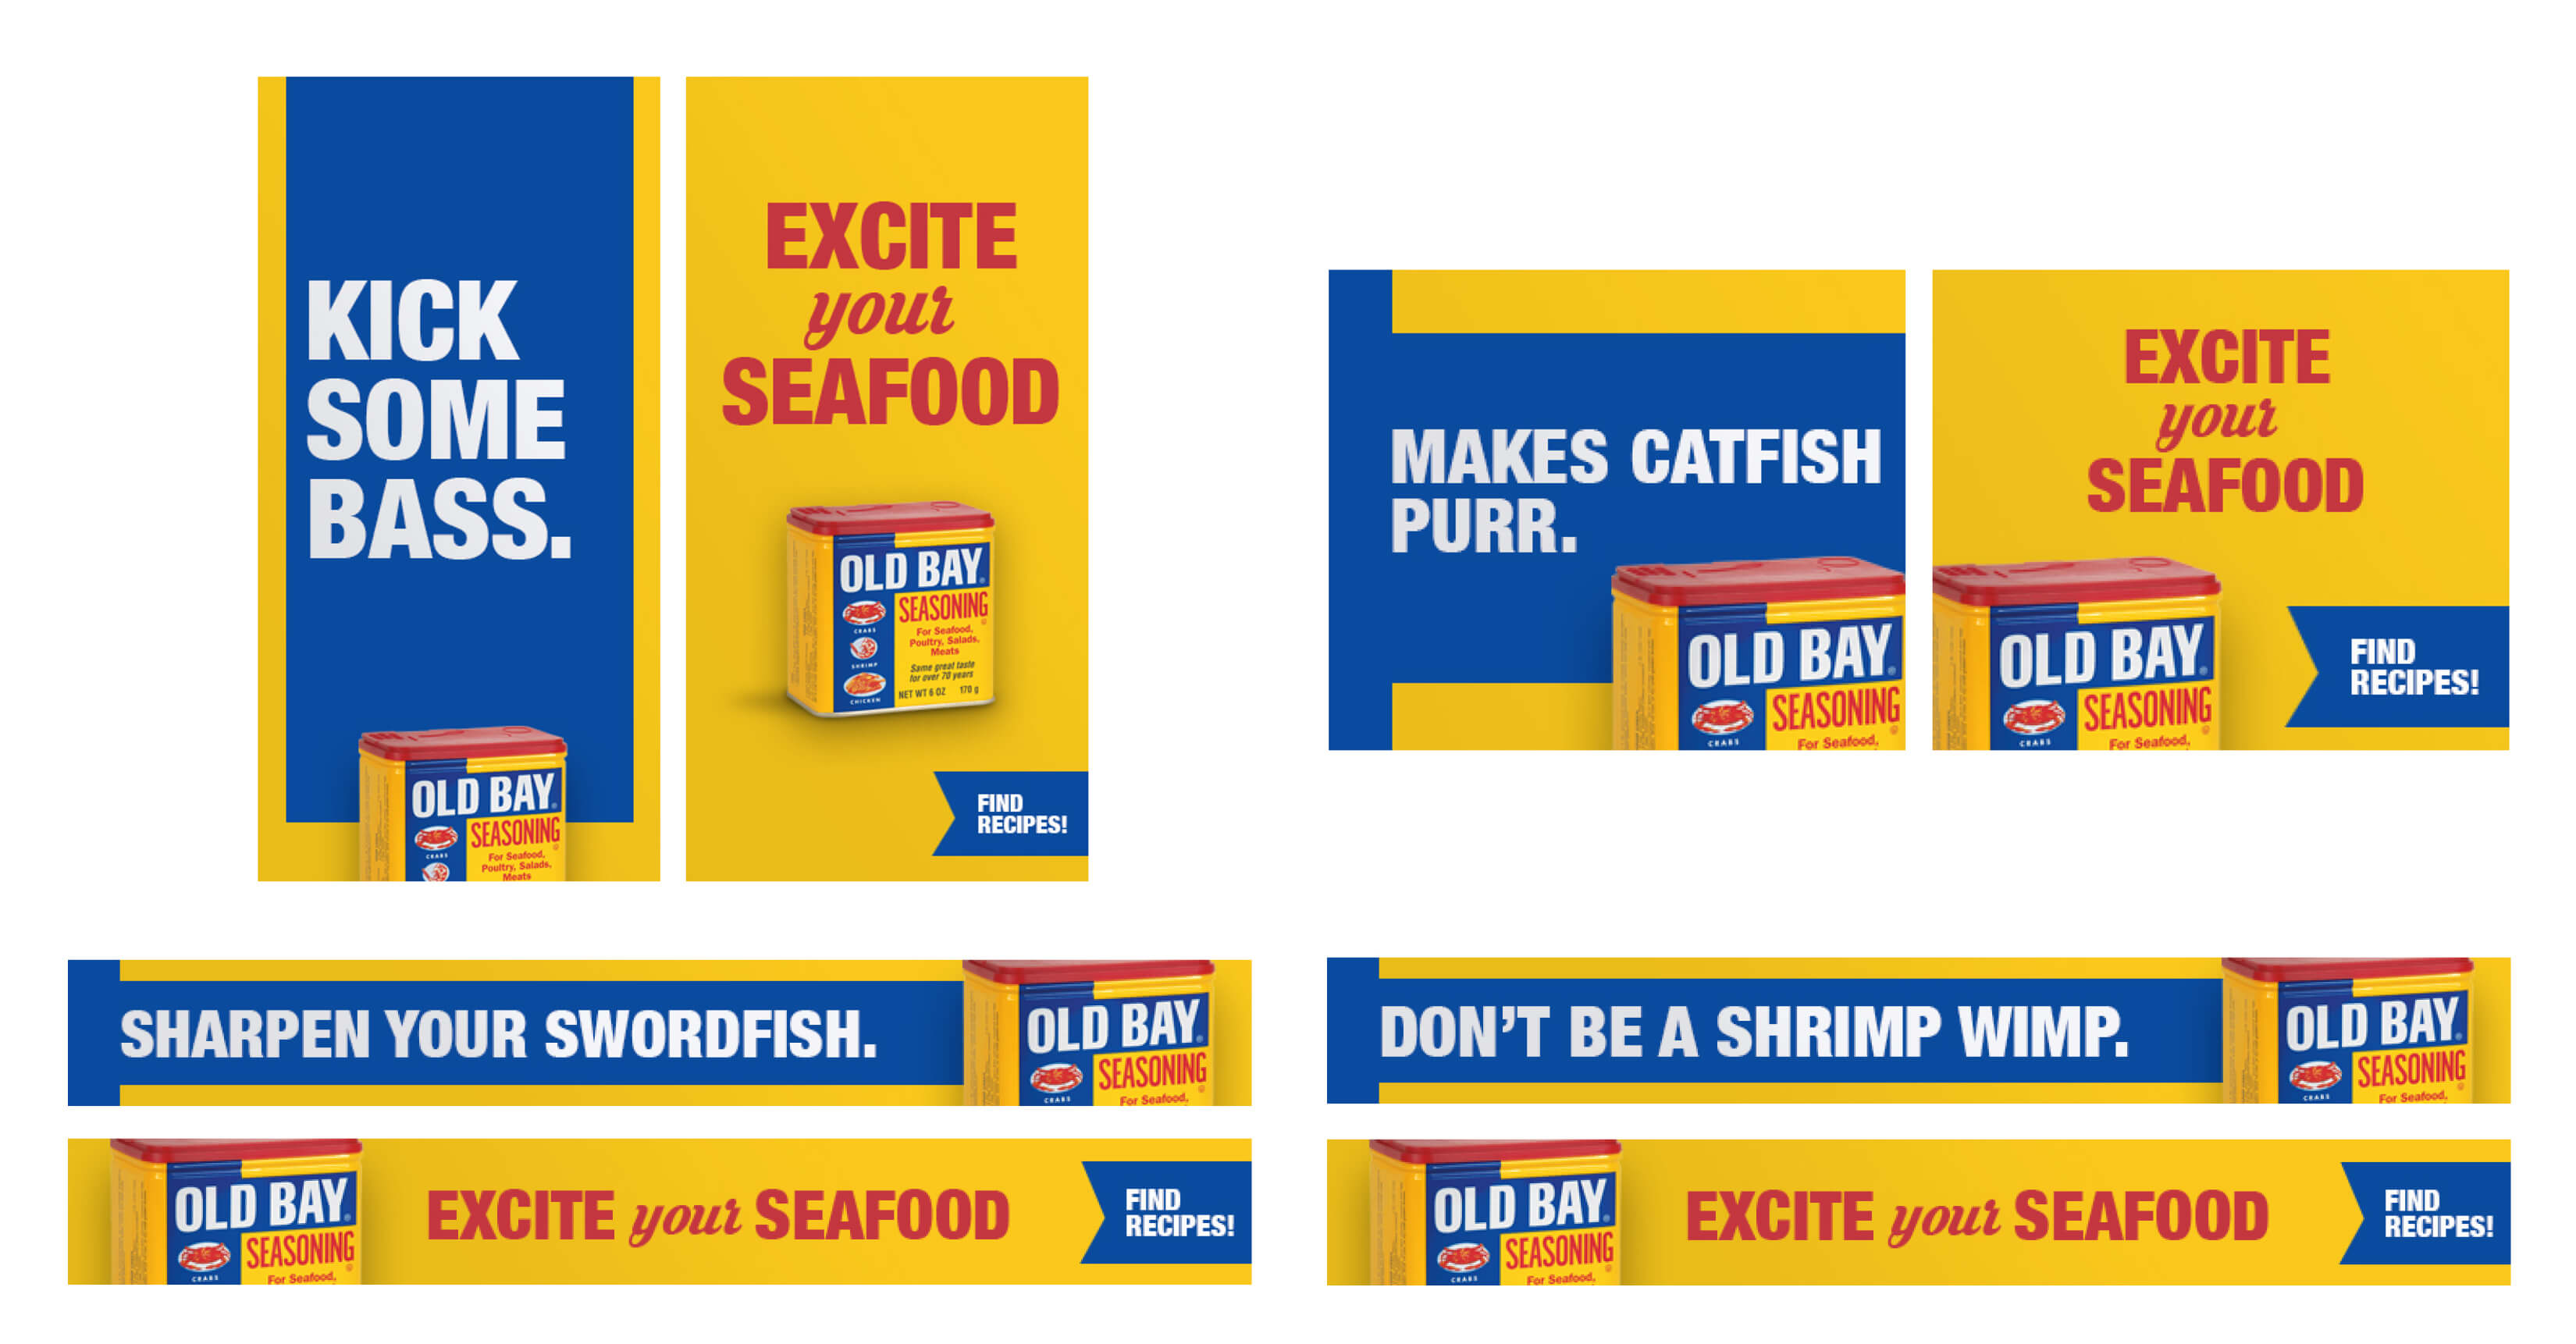 OLD BAY Excite your Seafood online banners